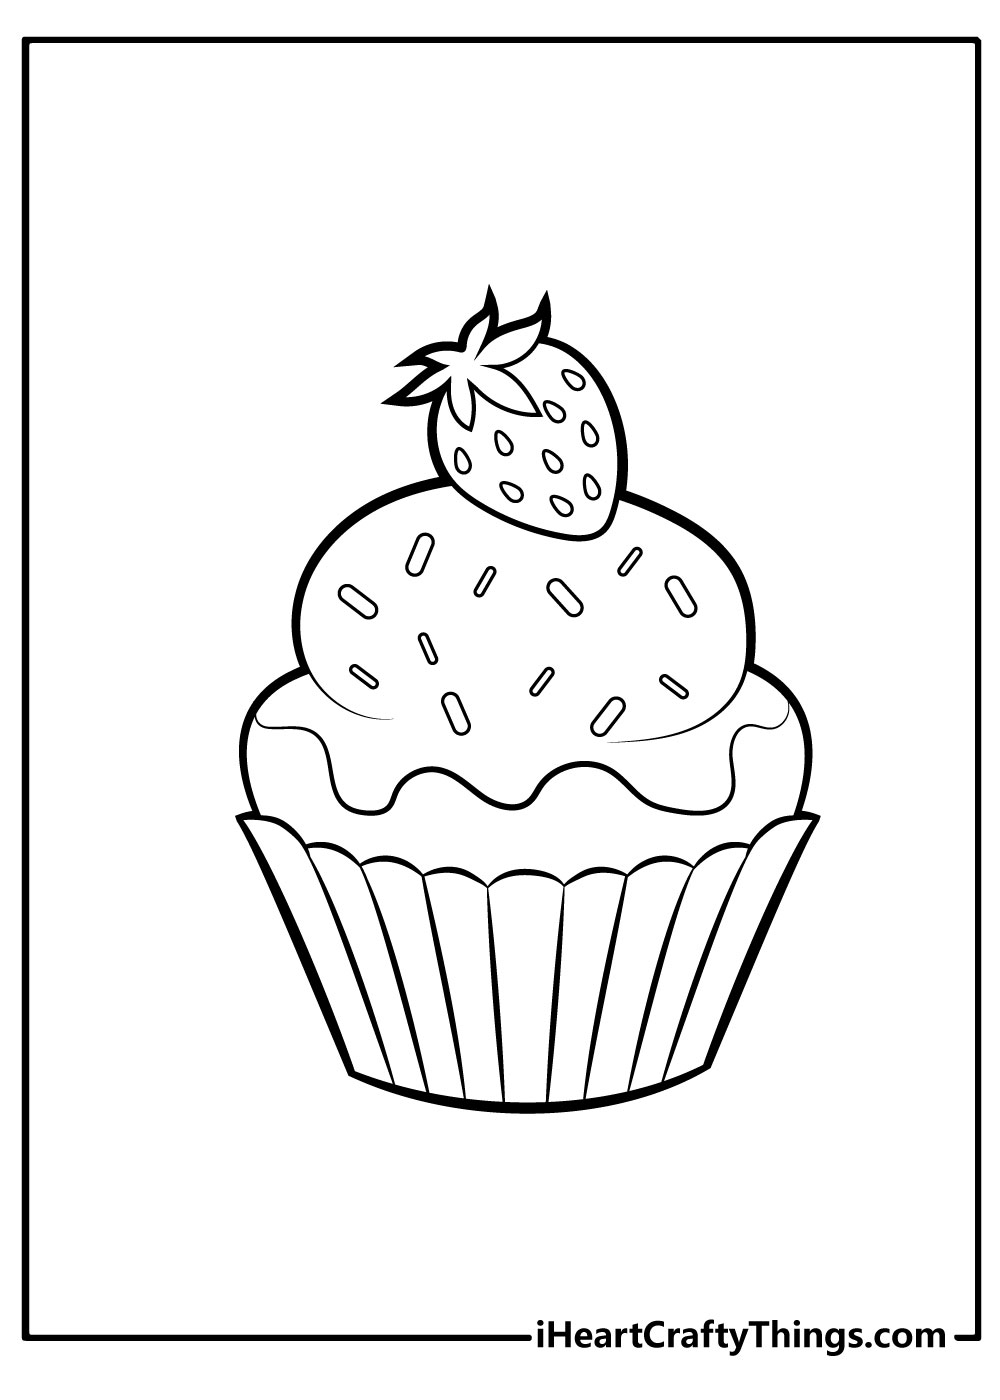 31 Delightful Cupcake Coloring Pages Printable 31